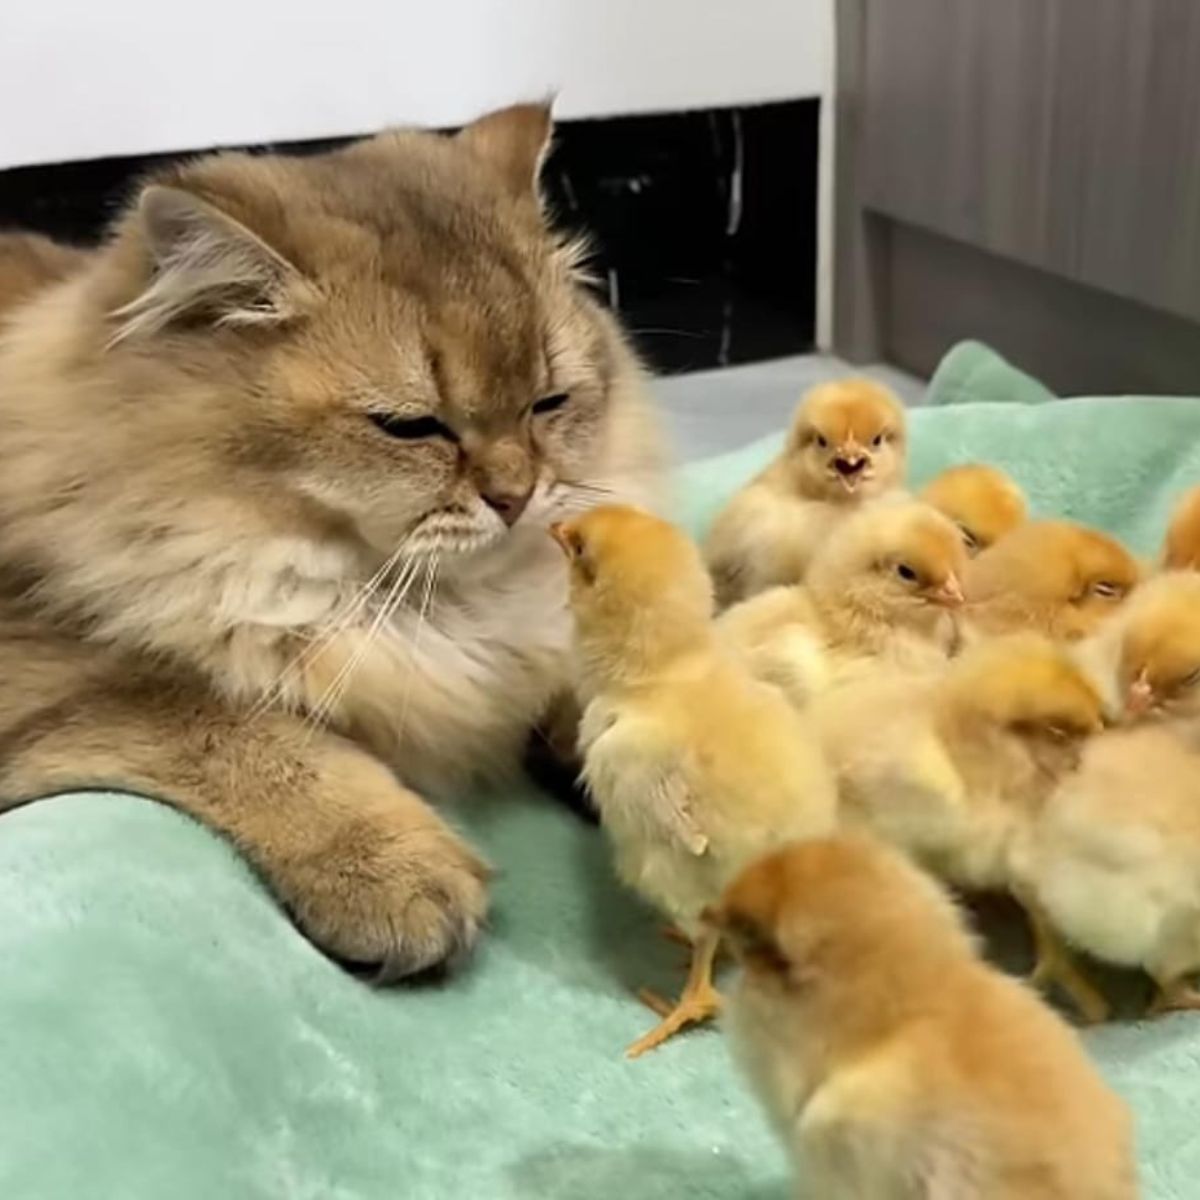 a cat and some chicks